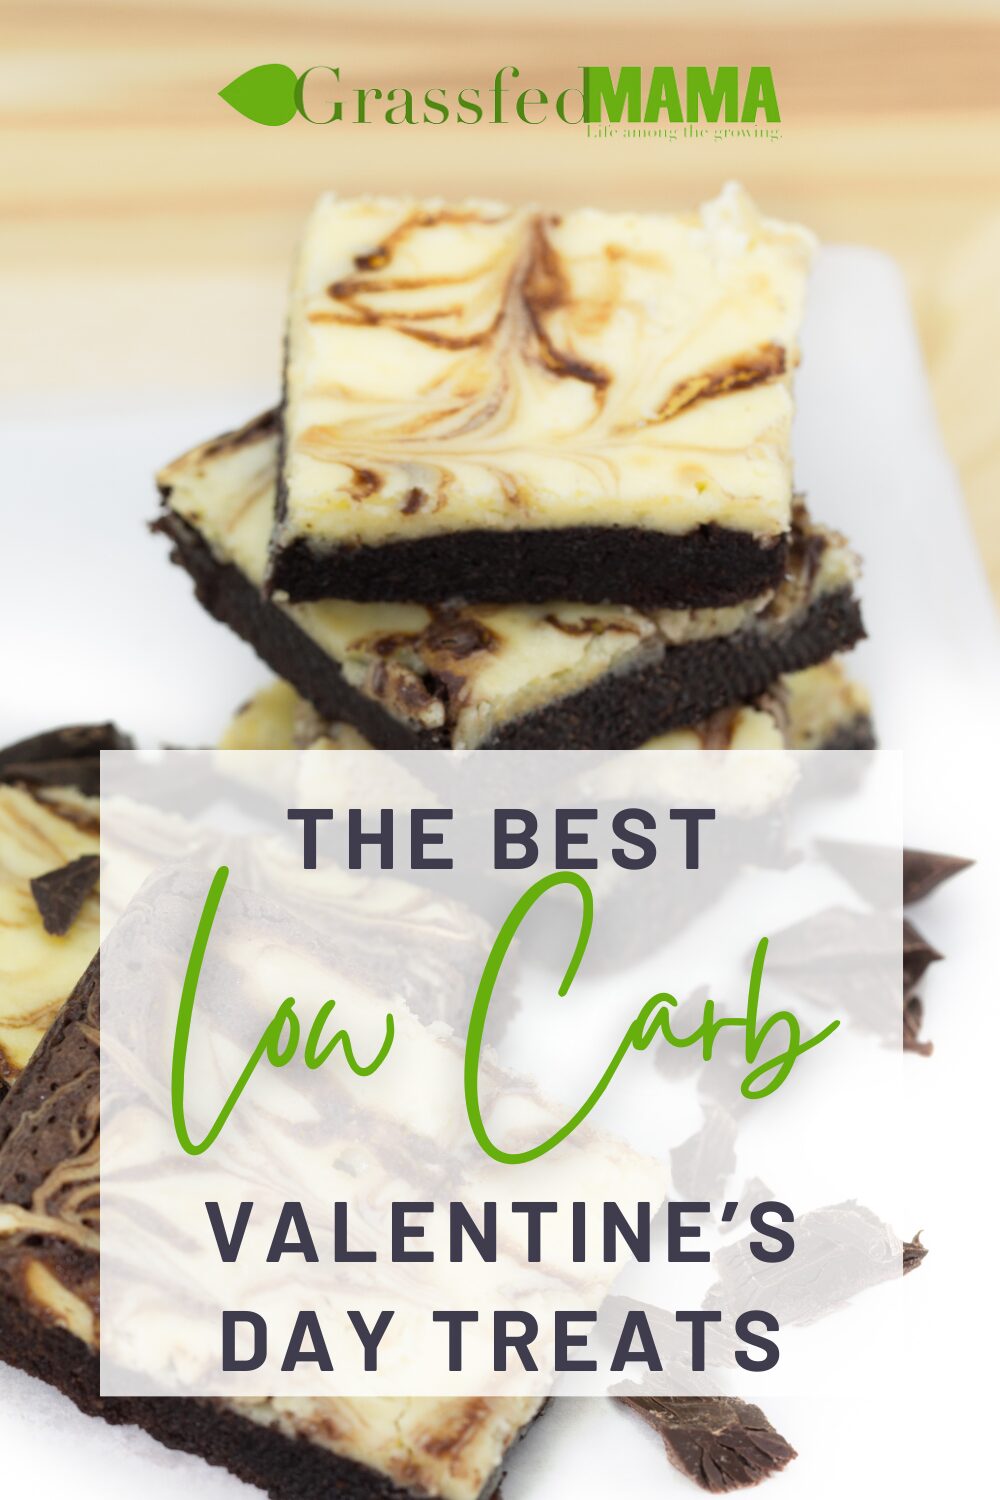 The Best Low Carb Valentine's Day Treats